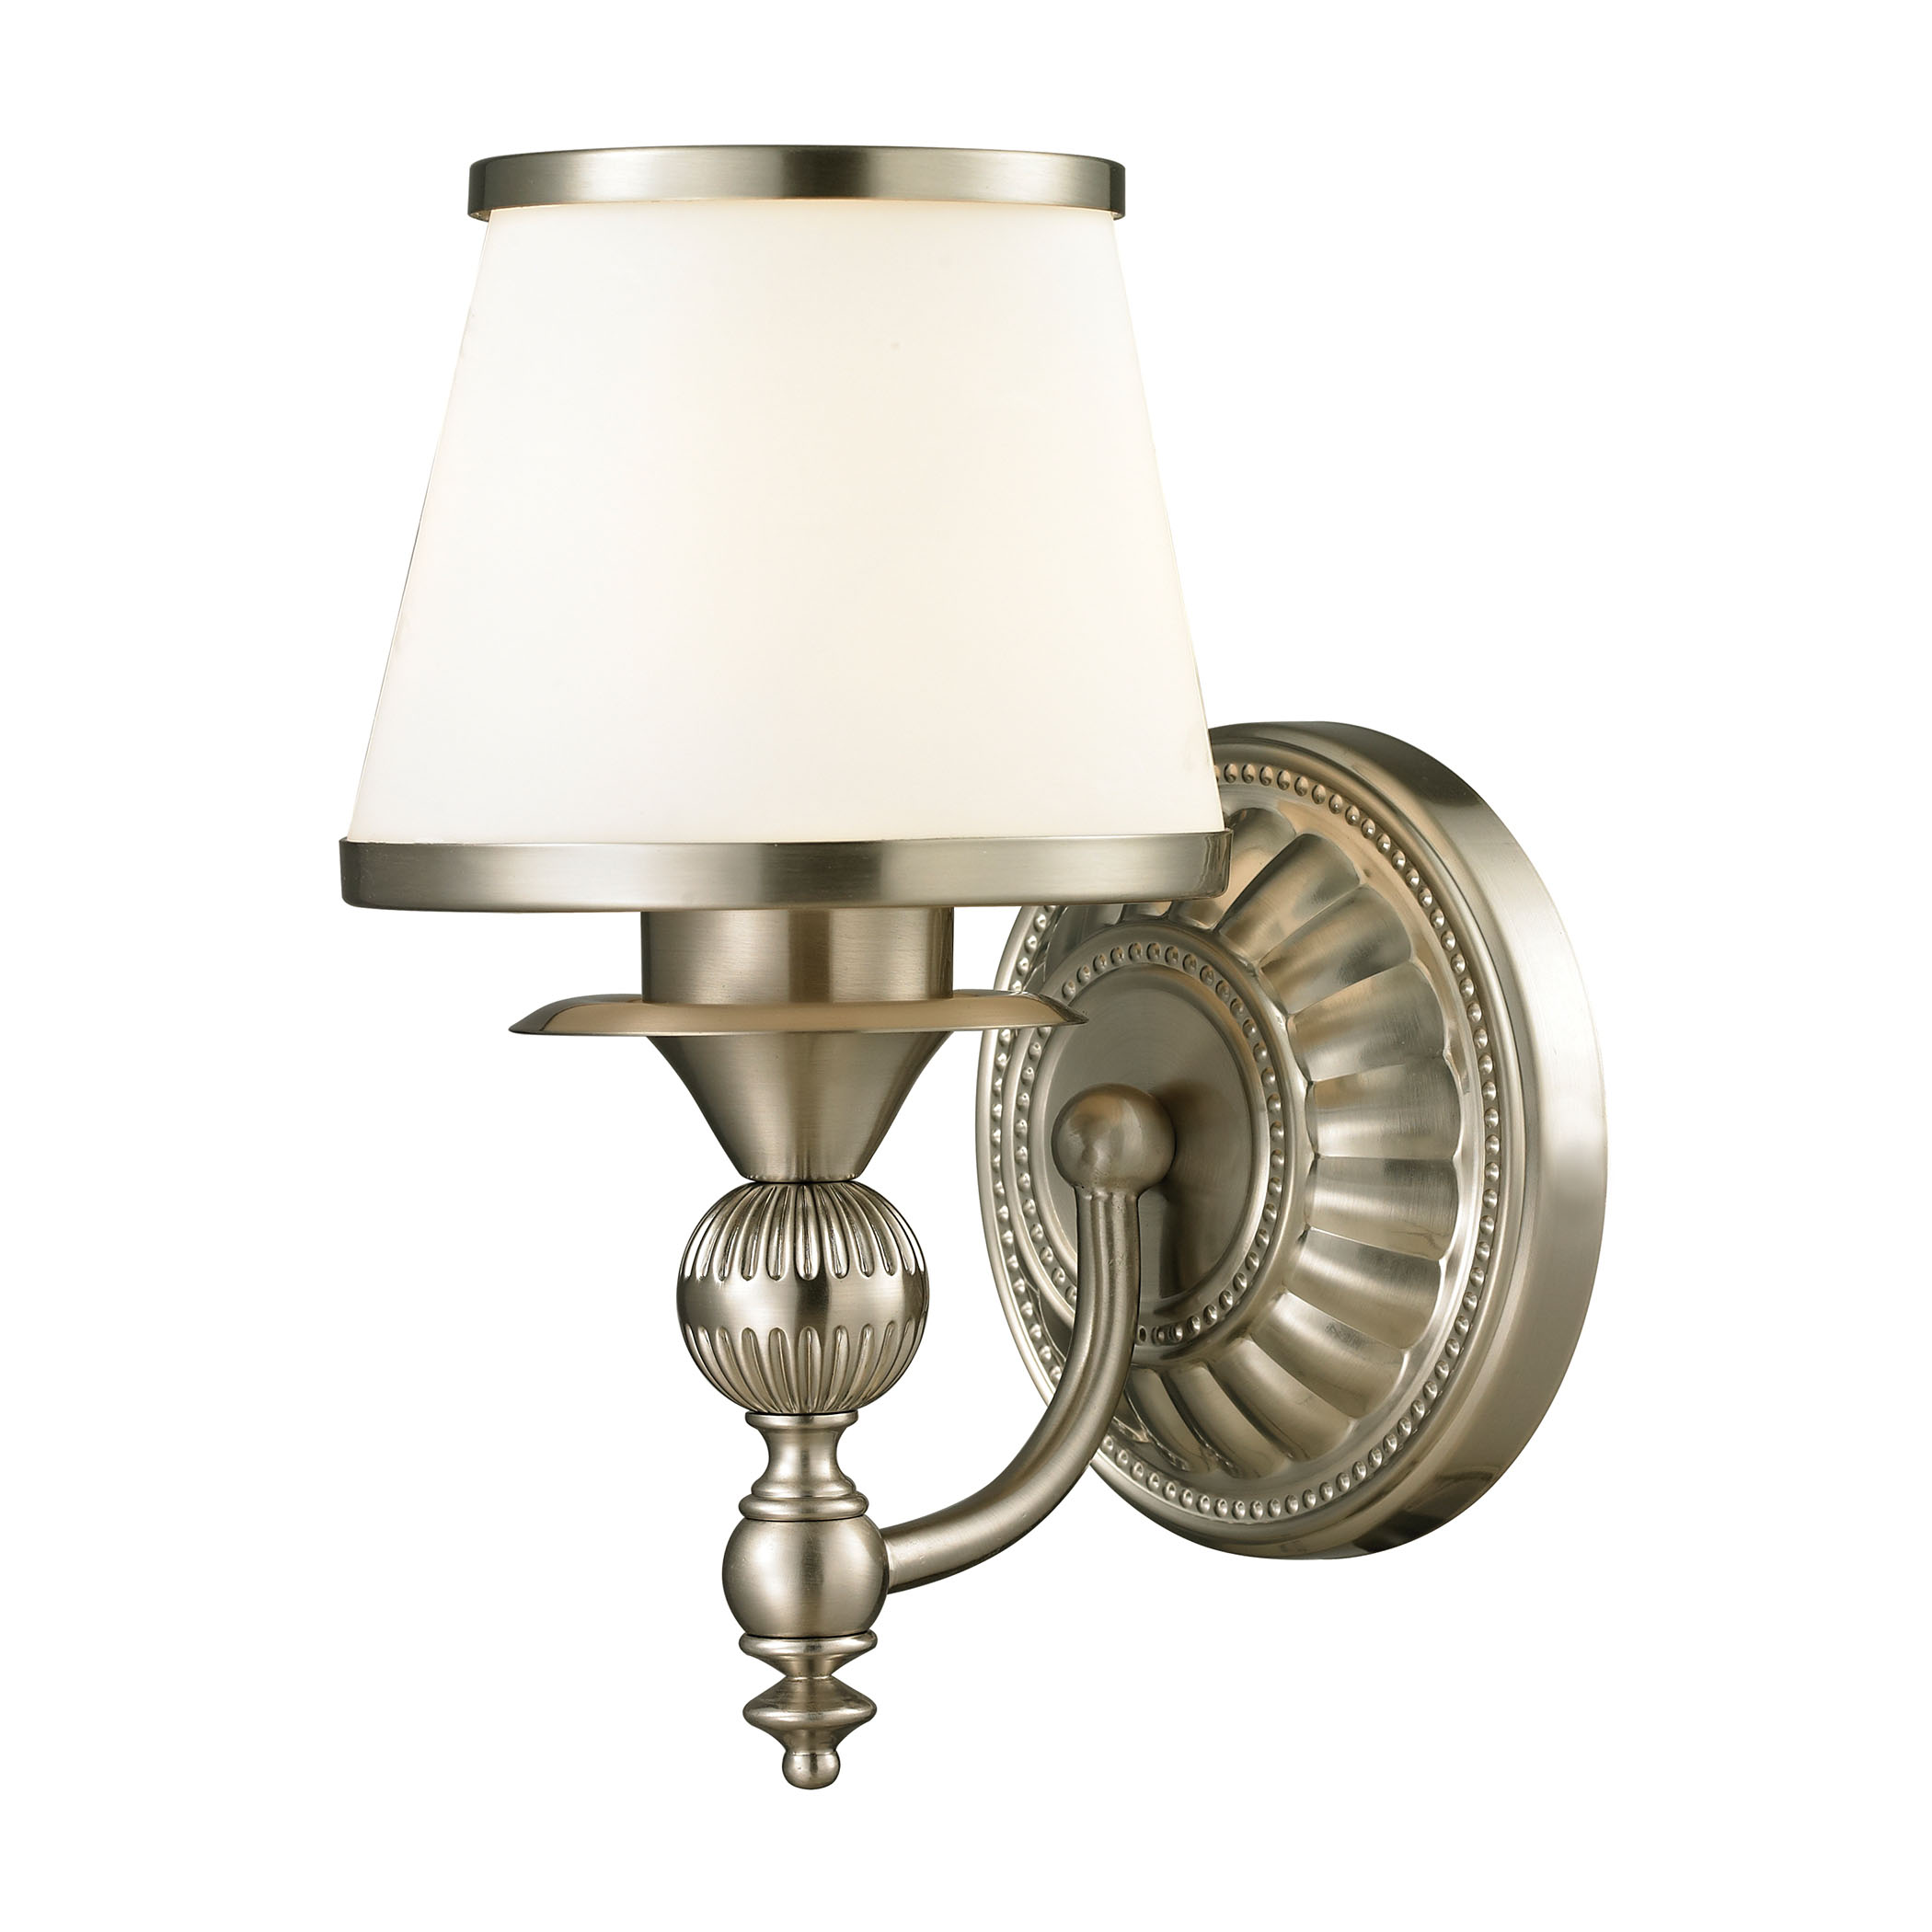 Smithfield Collection 1 Light Bath in Brushed Nickel